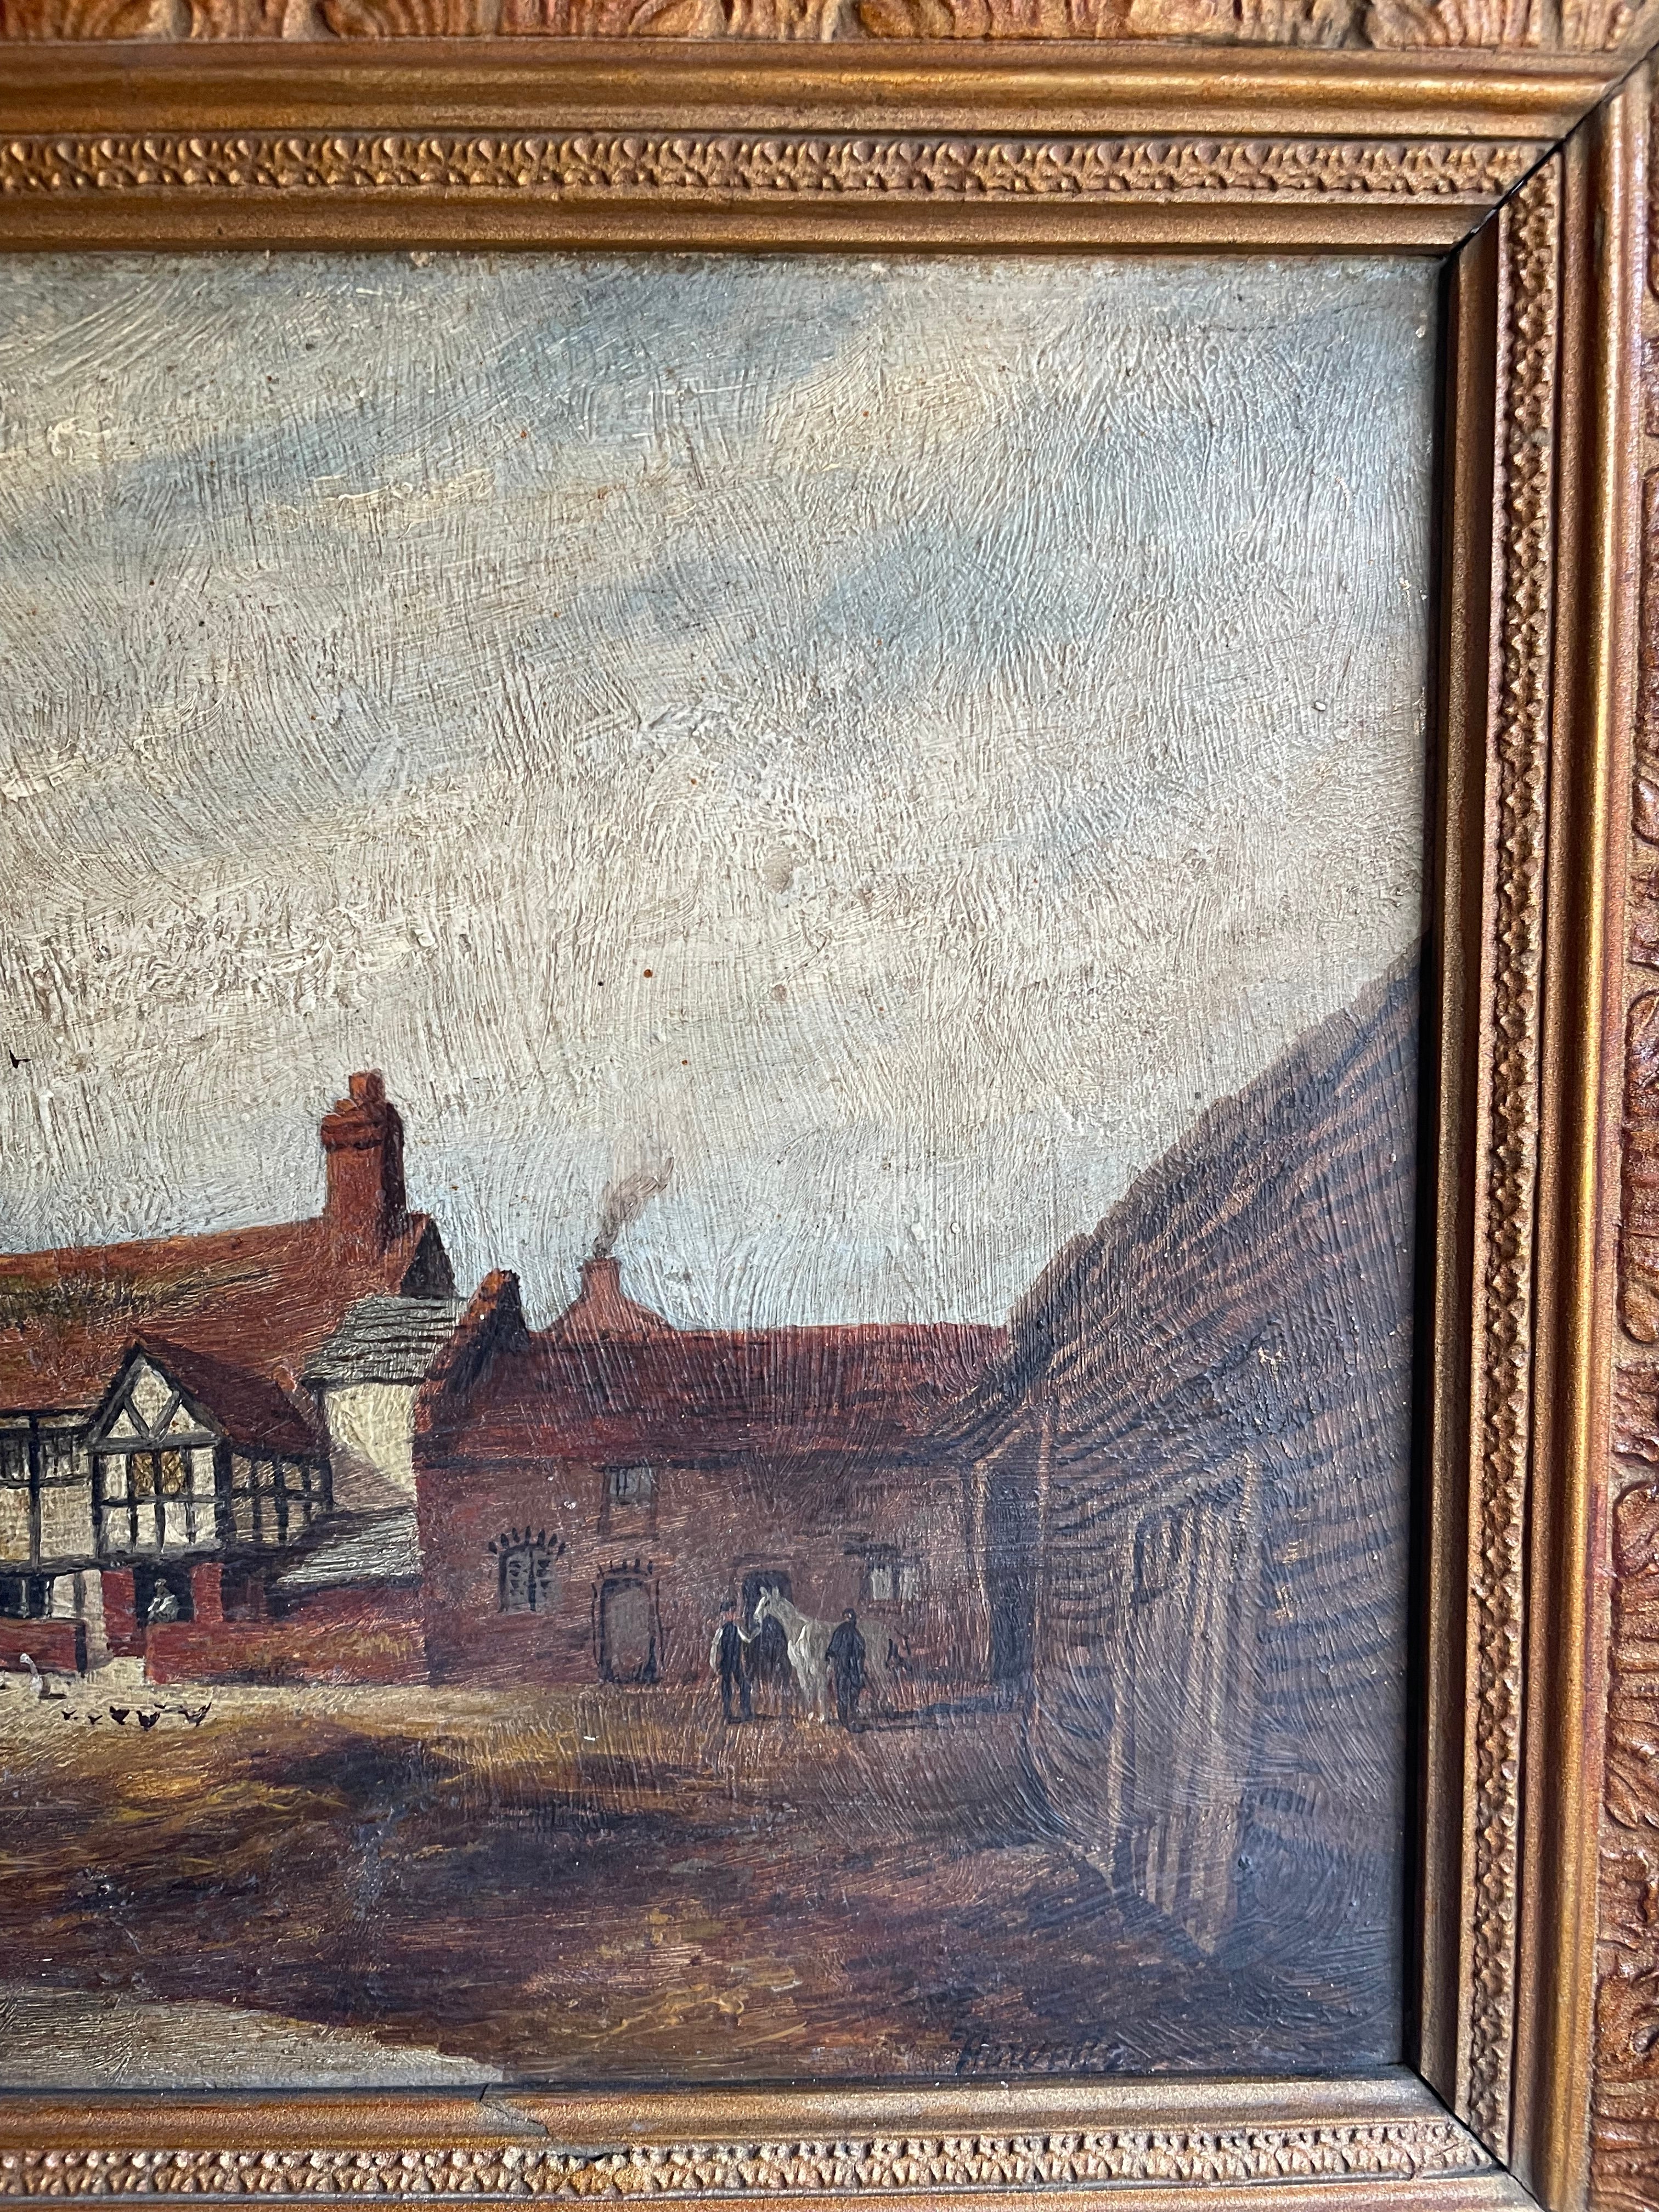 At the Farm: 19th Century Oil on Board